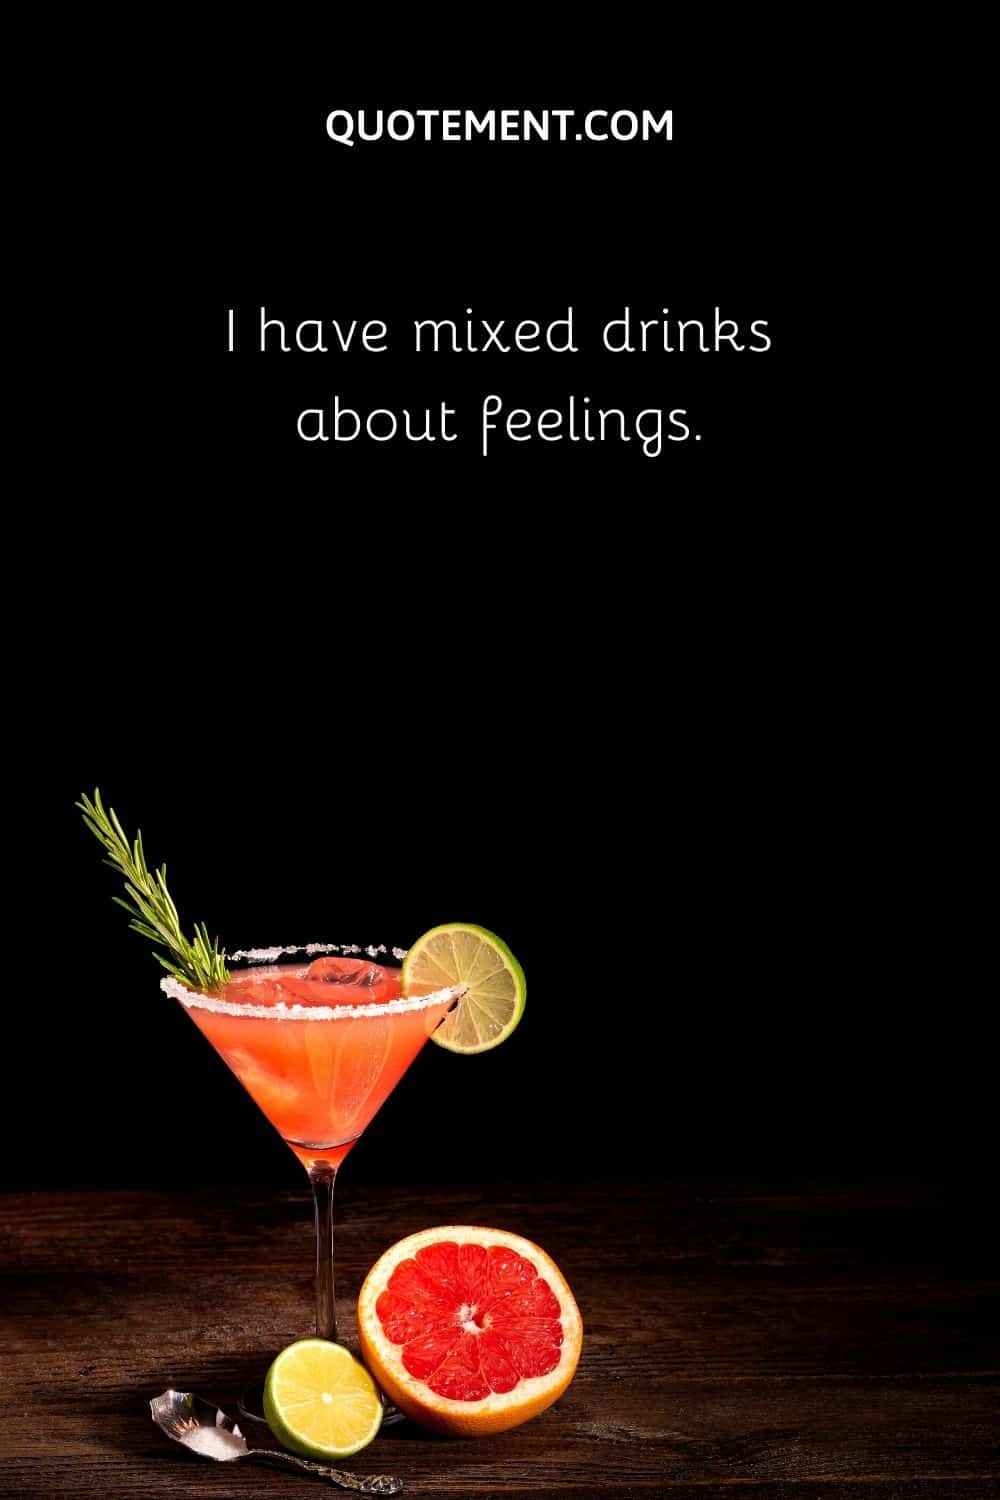 I have mixed drinks about feelings.